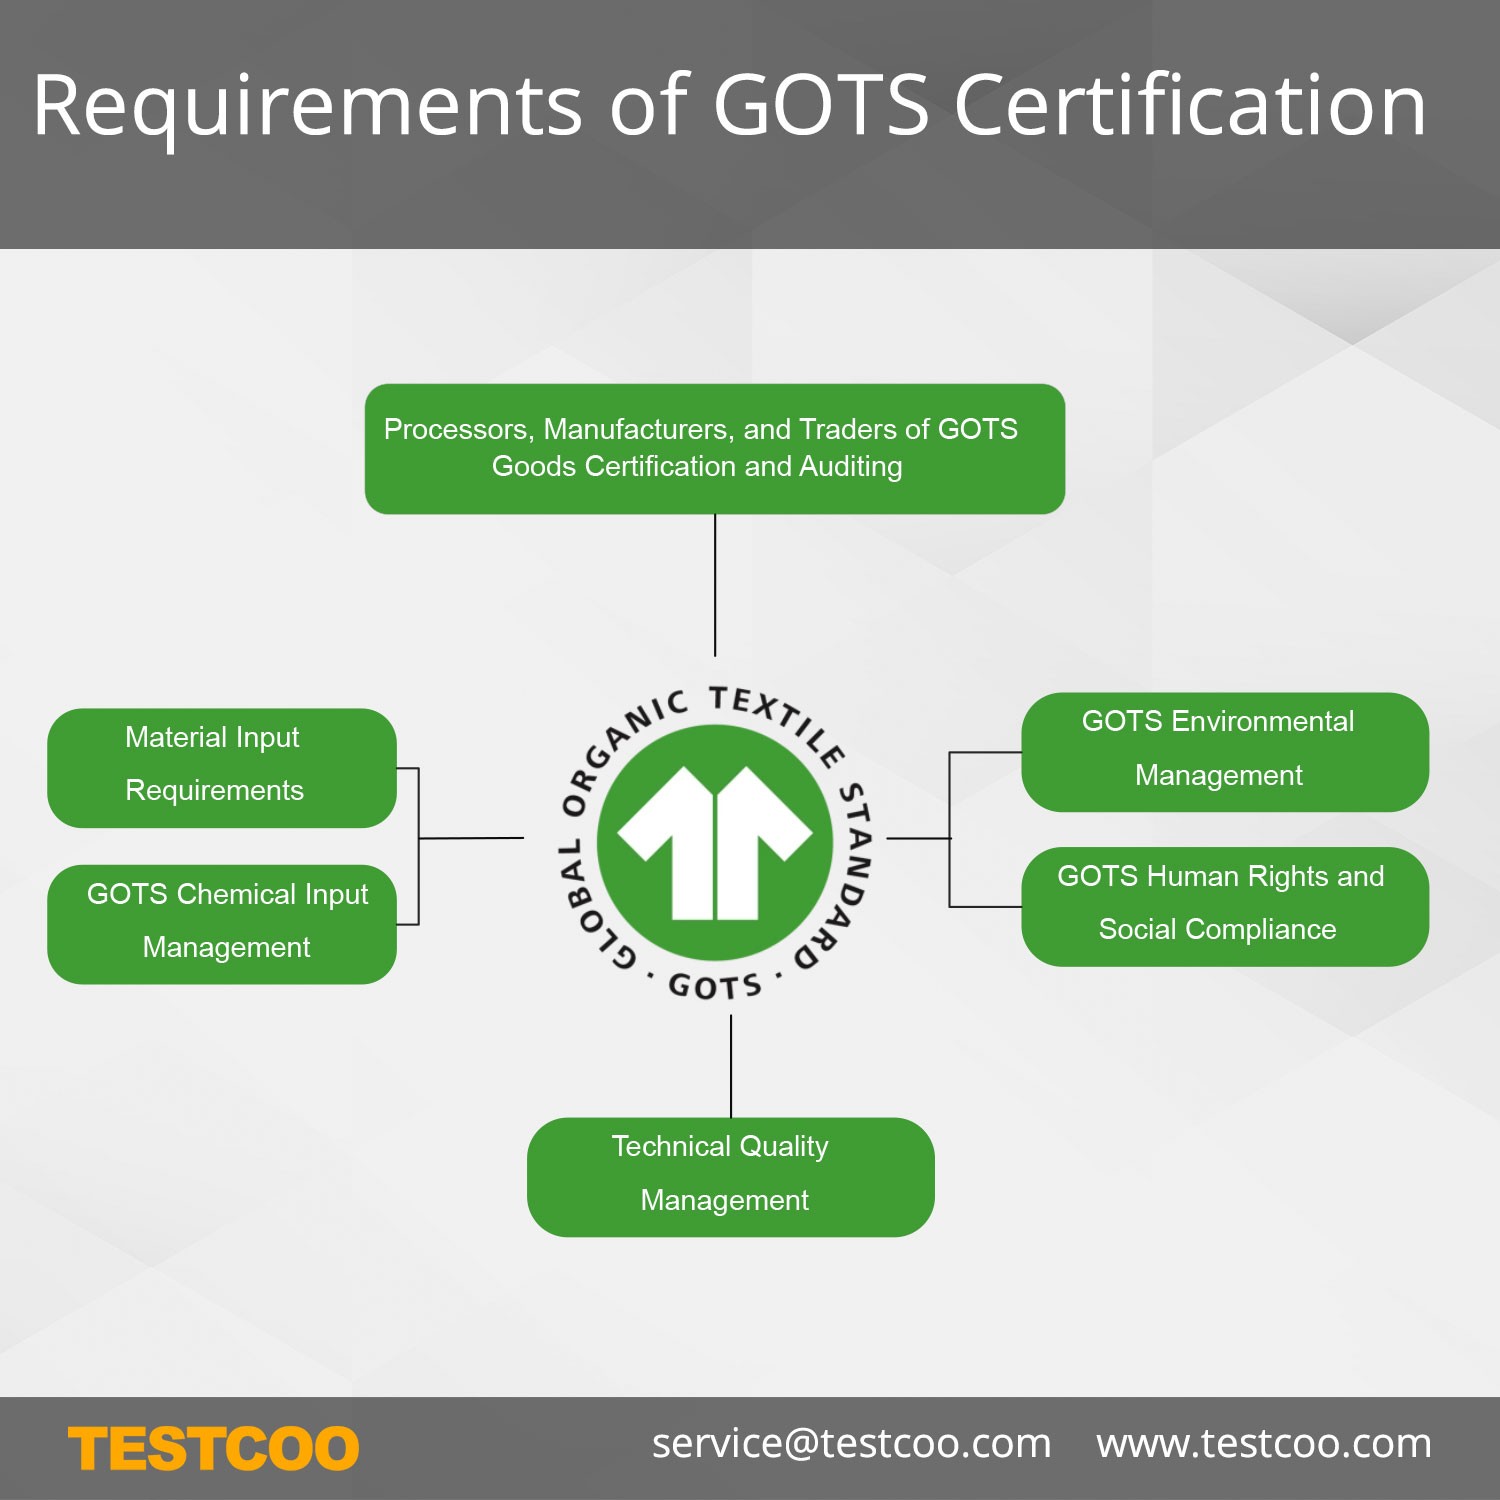 Requirements of GOTS Certification